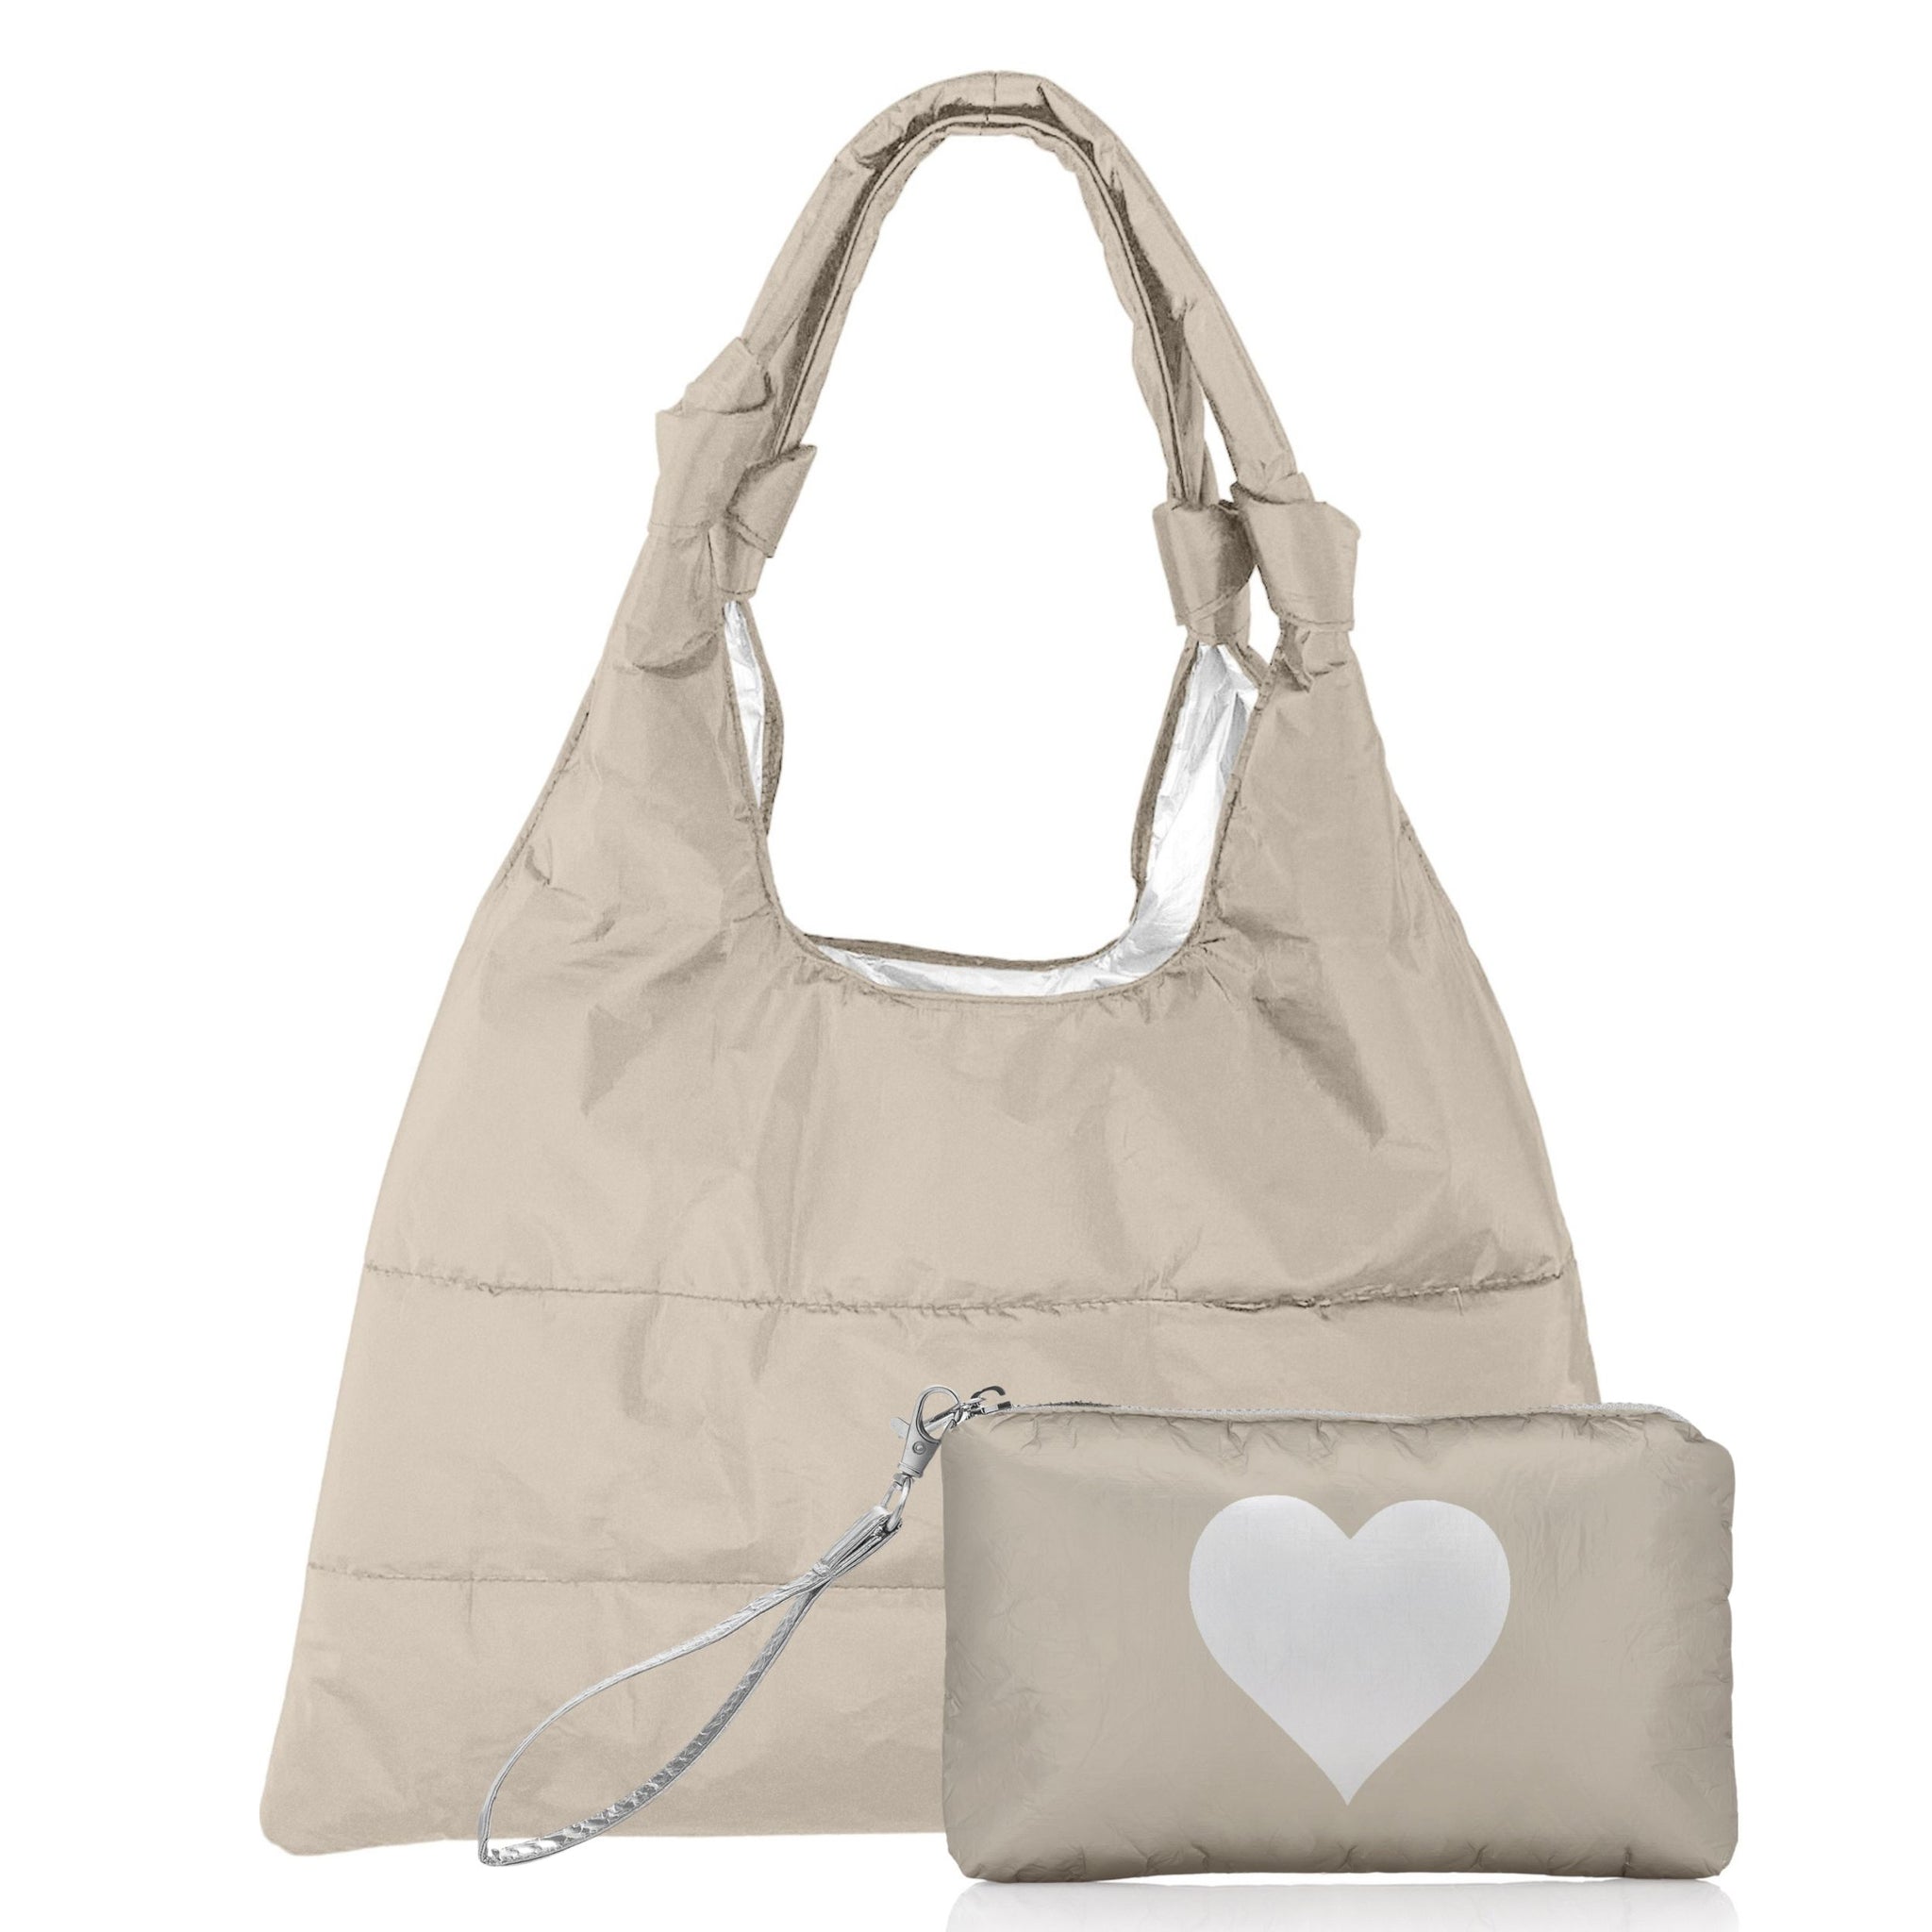 Shimmer beige top handle tote bag and wristlet with silver heart